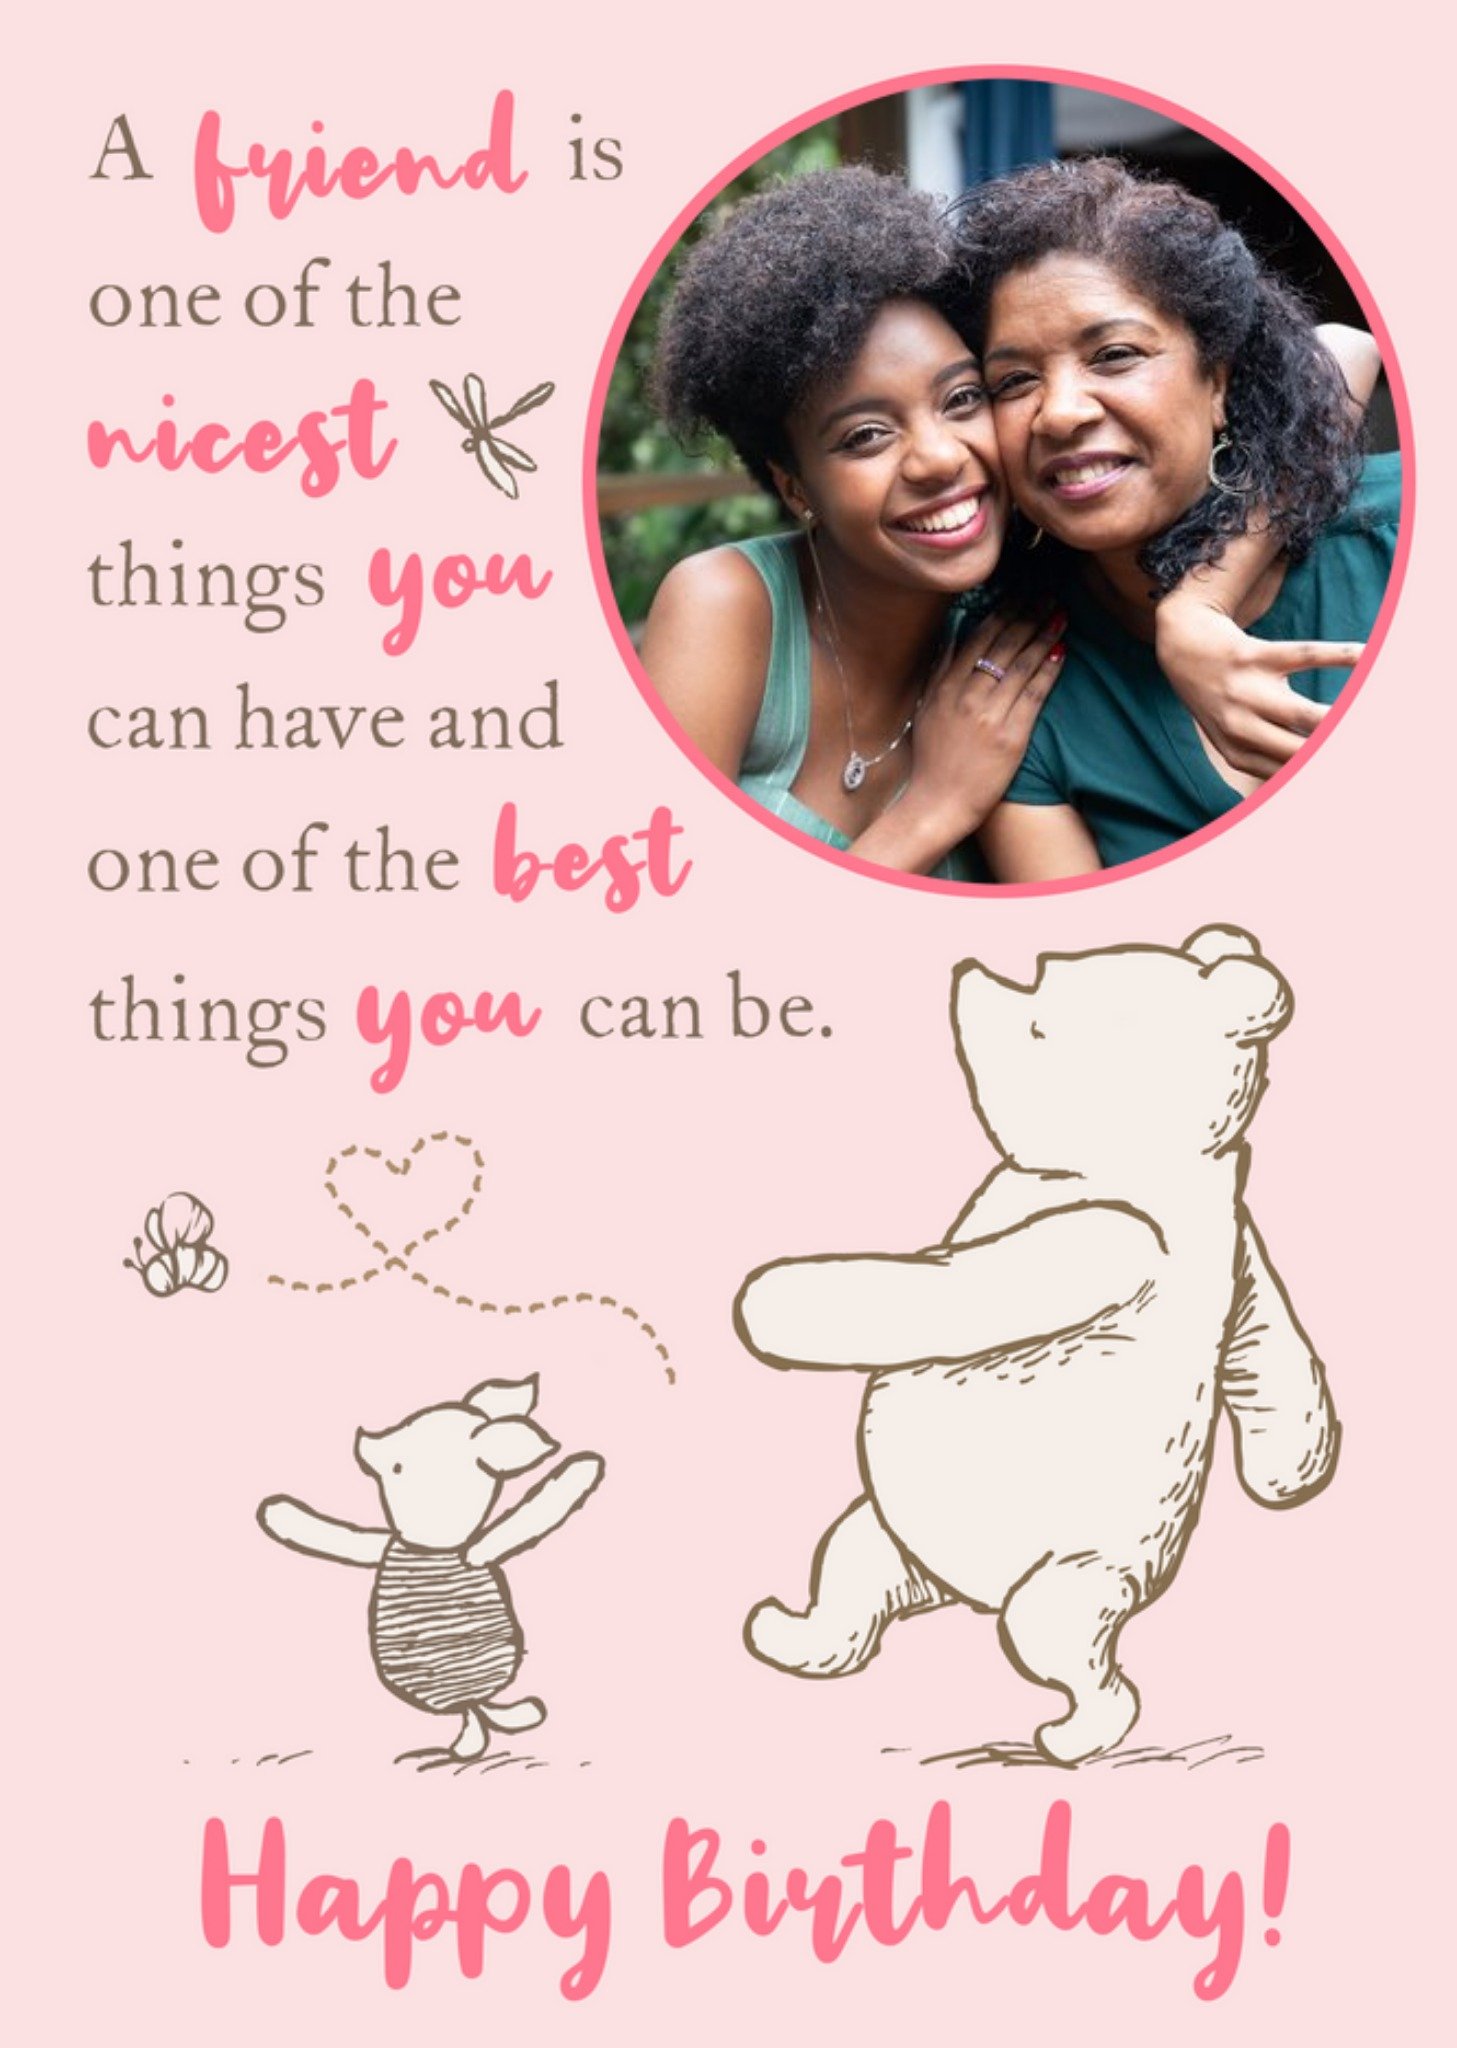 Disney Winnie The Pooh A Friend Is One Of The Nicest Things You Can Have Photo Upload Birthday Card,